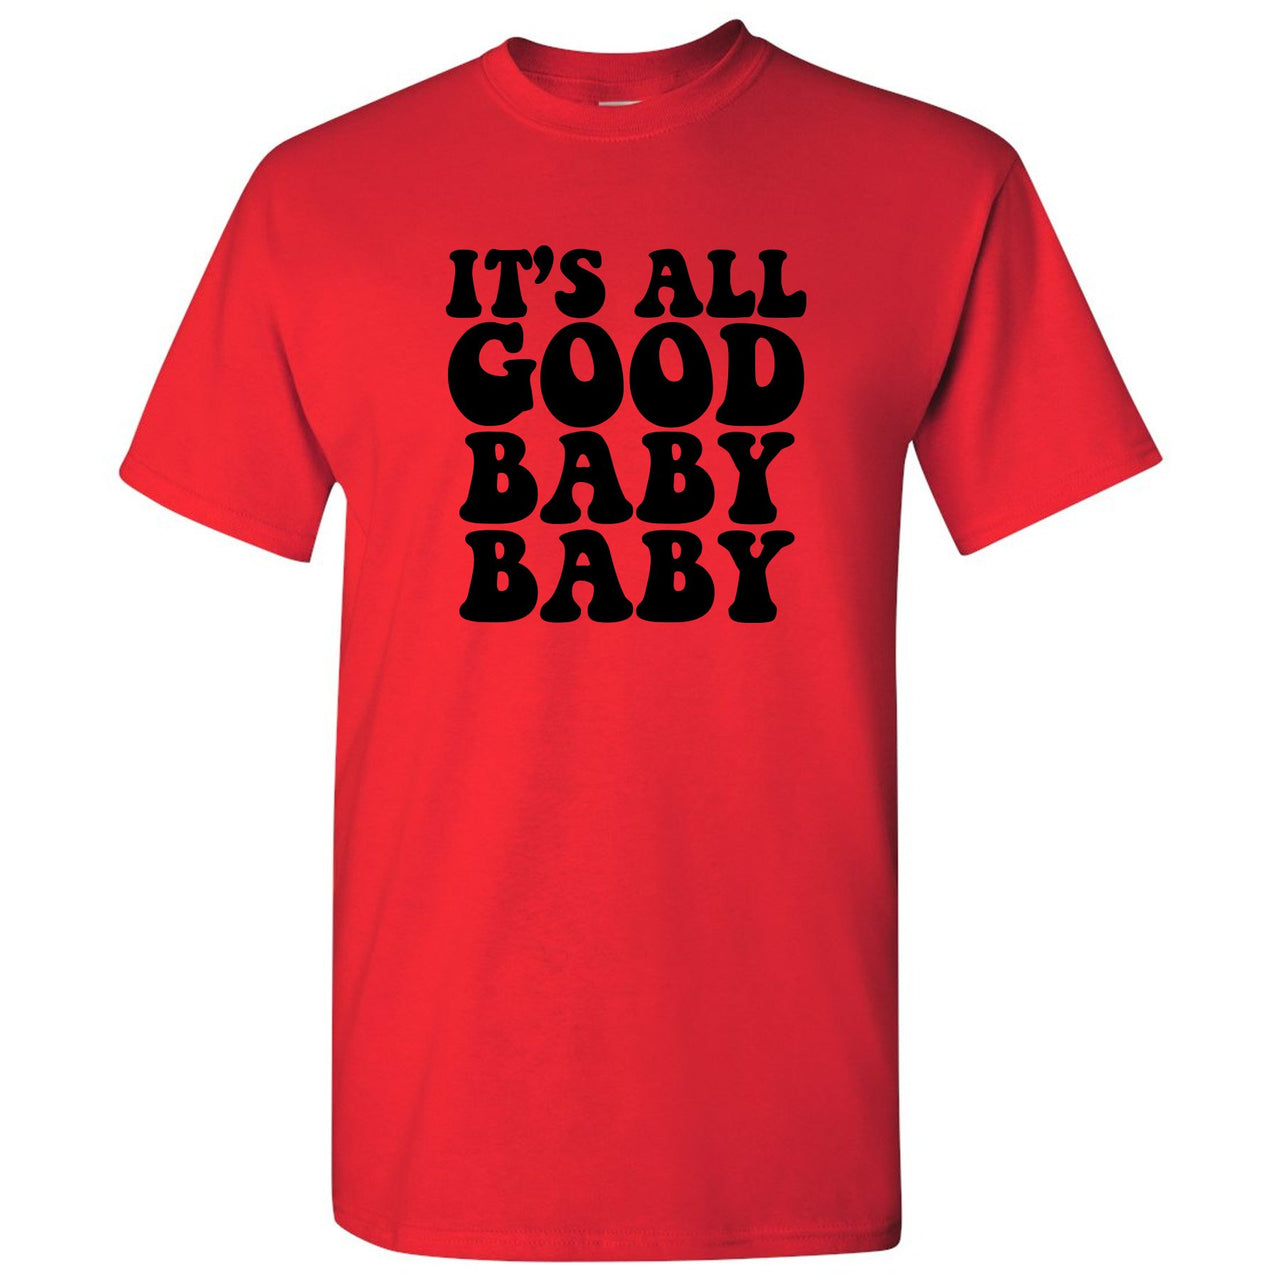 Reflections of a Champion 7s T Shirt | It's All Good Baby Baby, Red